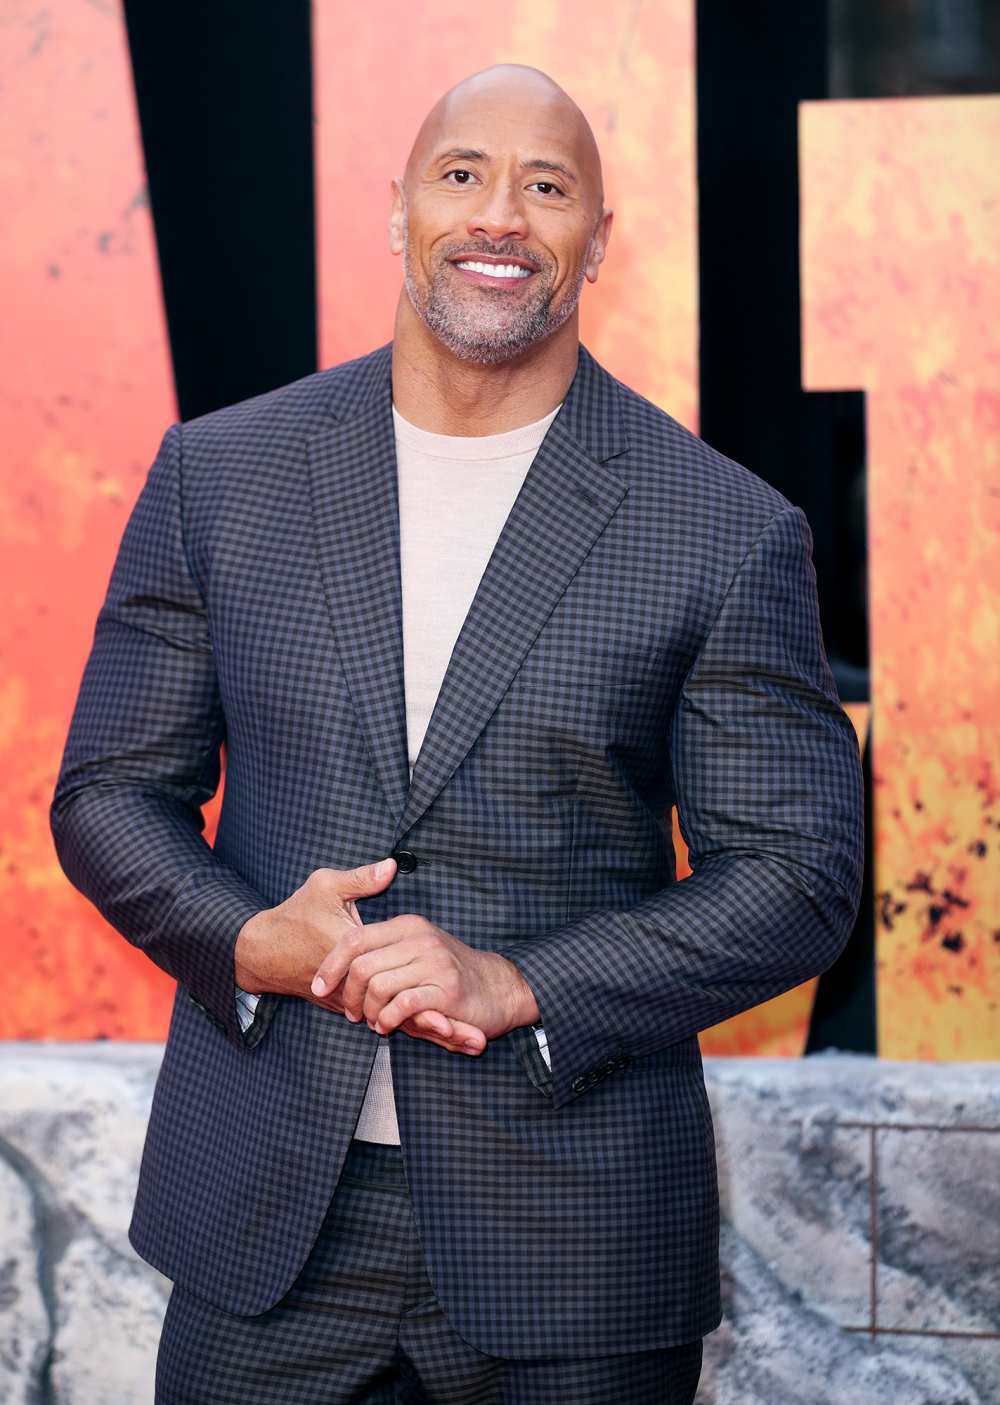 7 Things You Didn't Know About Dwayne 'The Rock' Johnson